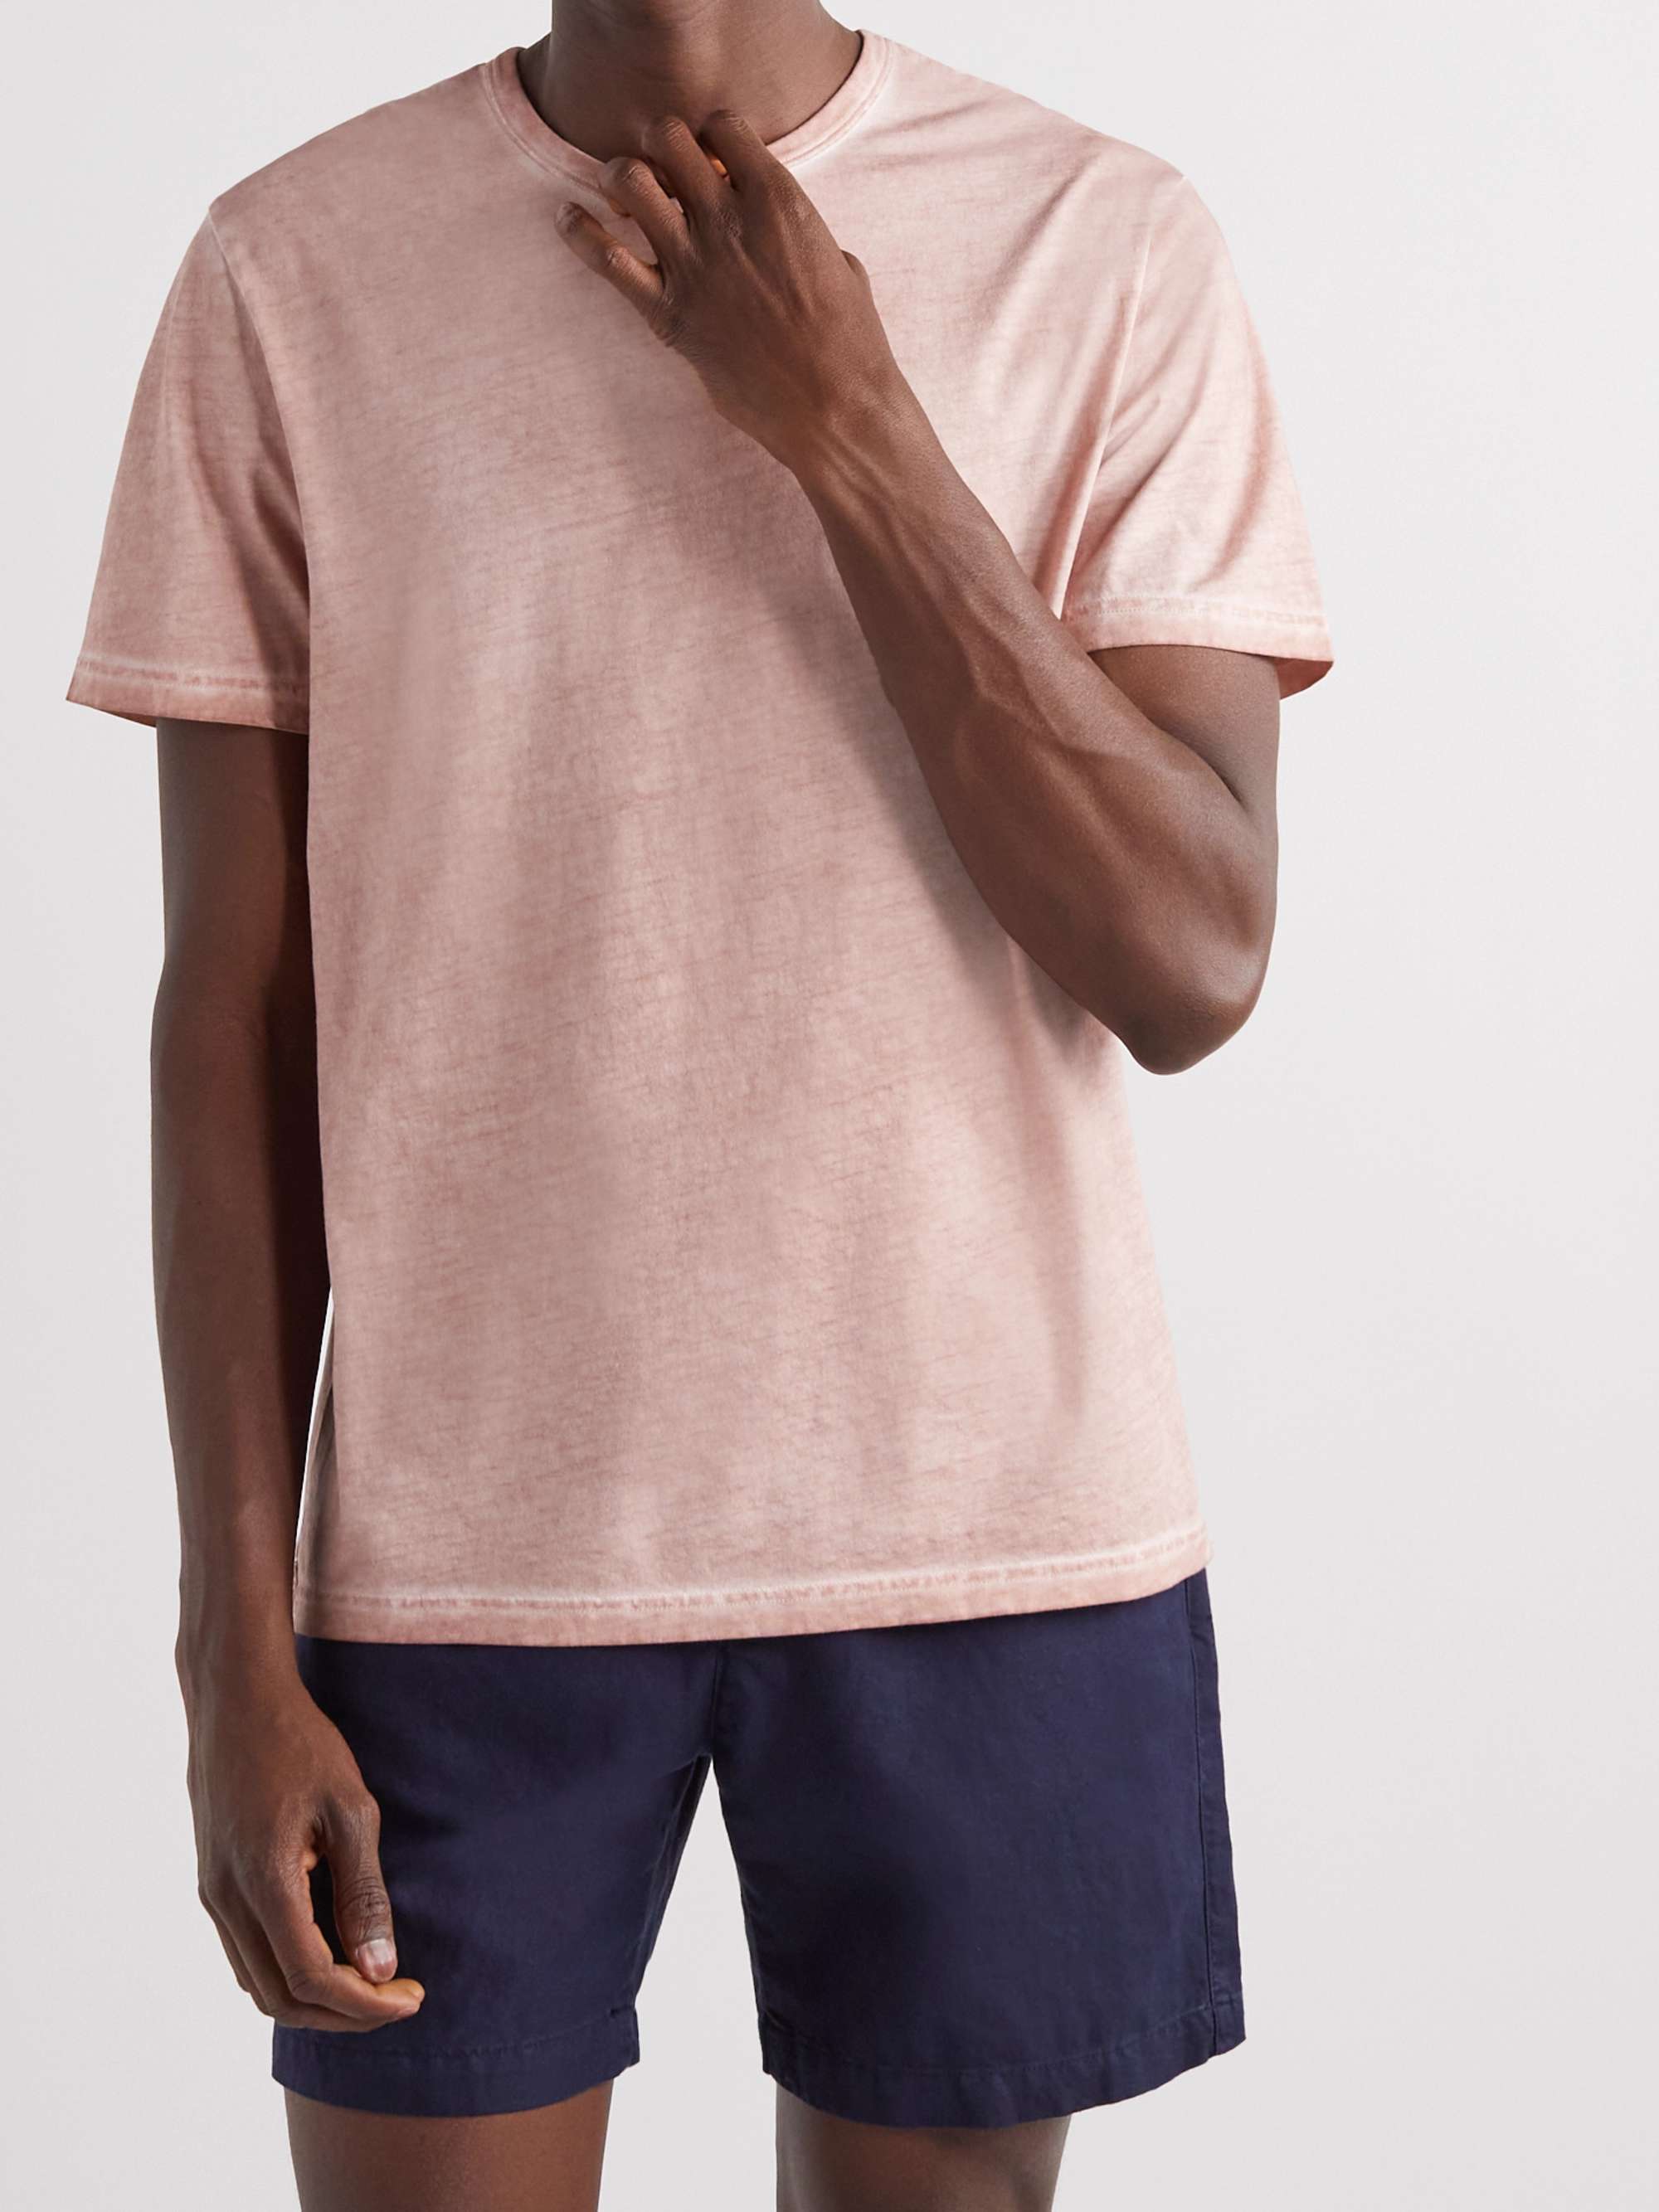 MR P. Cold-Dyed Organic Cotton-Jersey T-Shirt